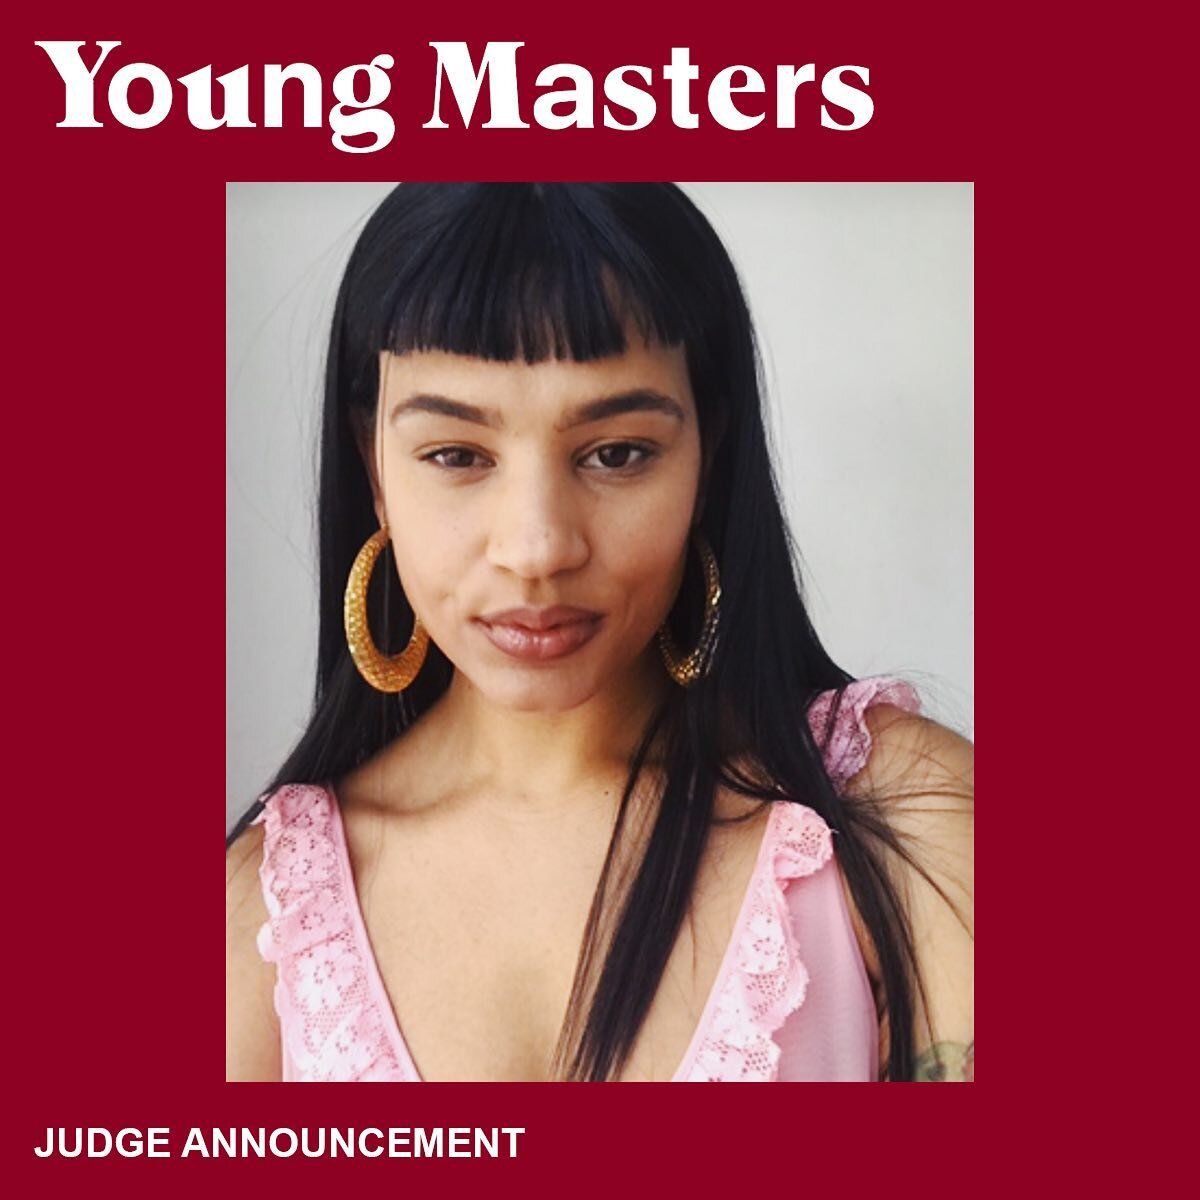 We are thrilled to welcome Charmaine Beneyto to the Young Masters Emerging Woman Artist Award judging panel this year!

Charmaine is a visual artist, director, writer and curator. She is also the founder of CB-Art Advisory where she works to build co